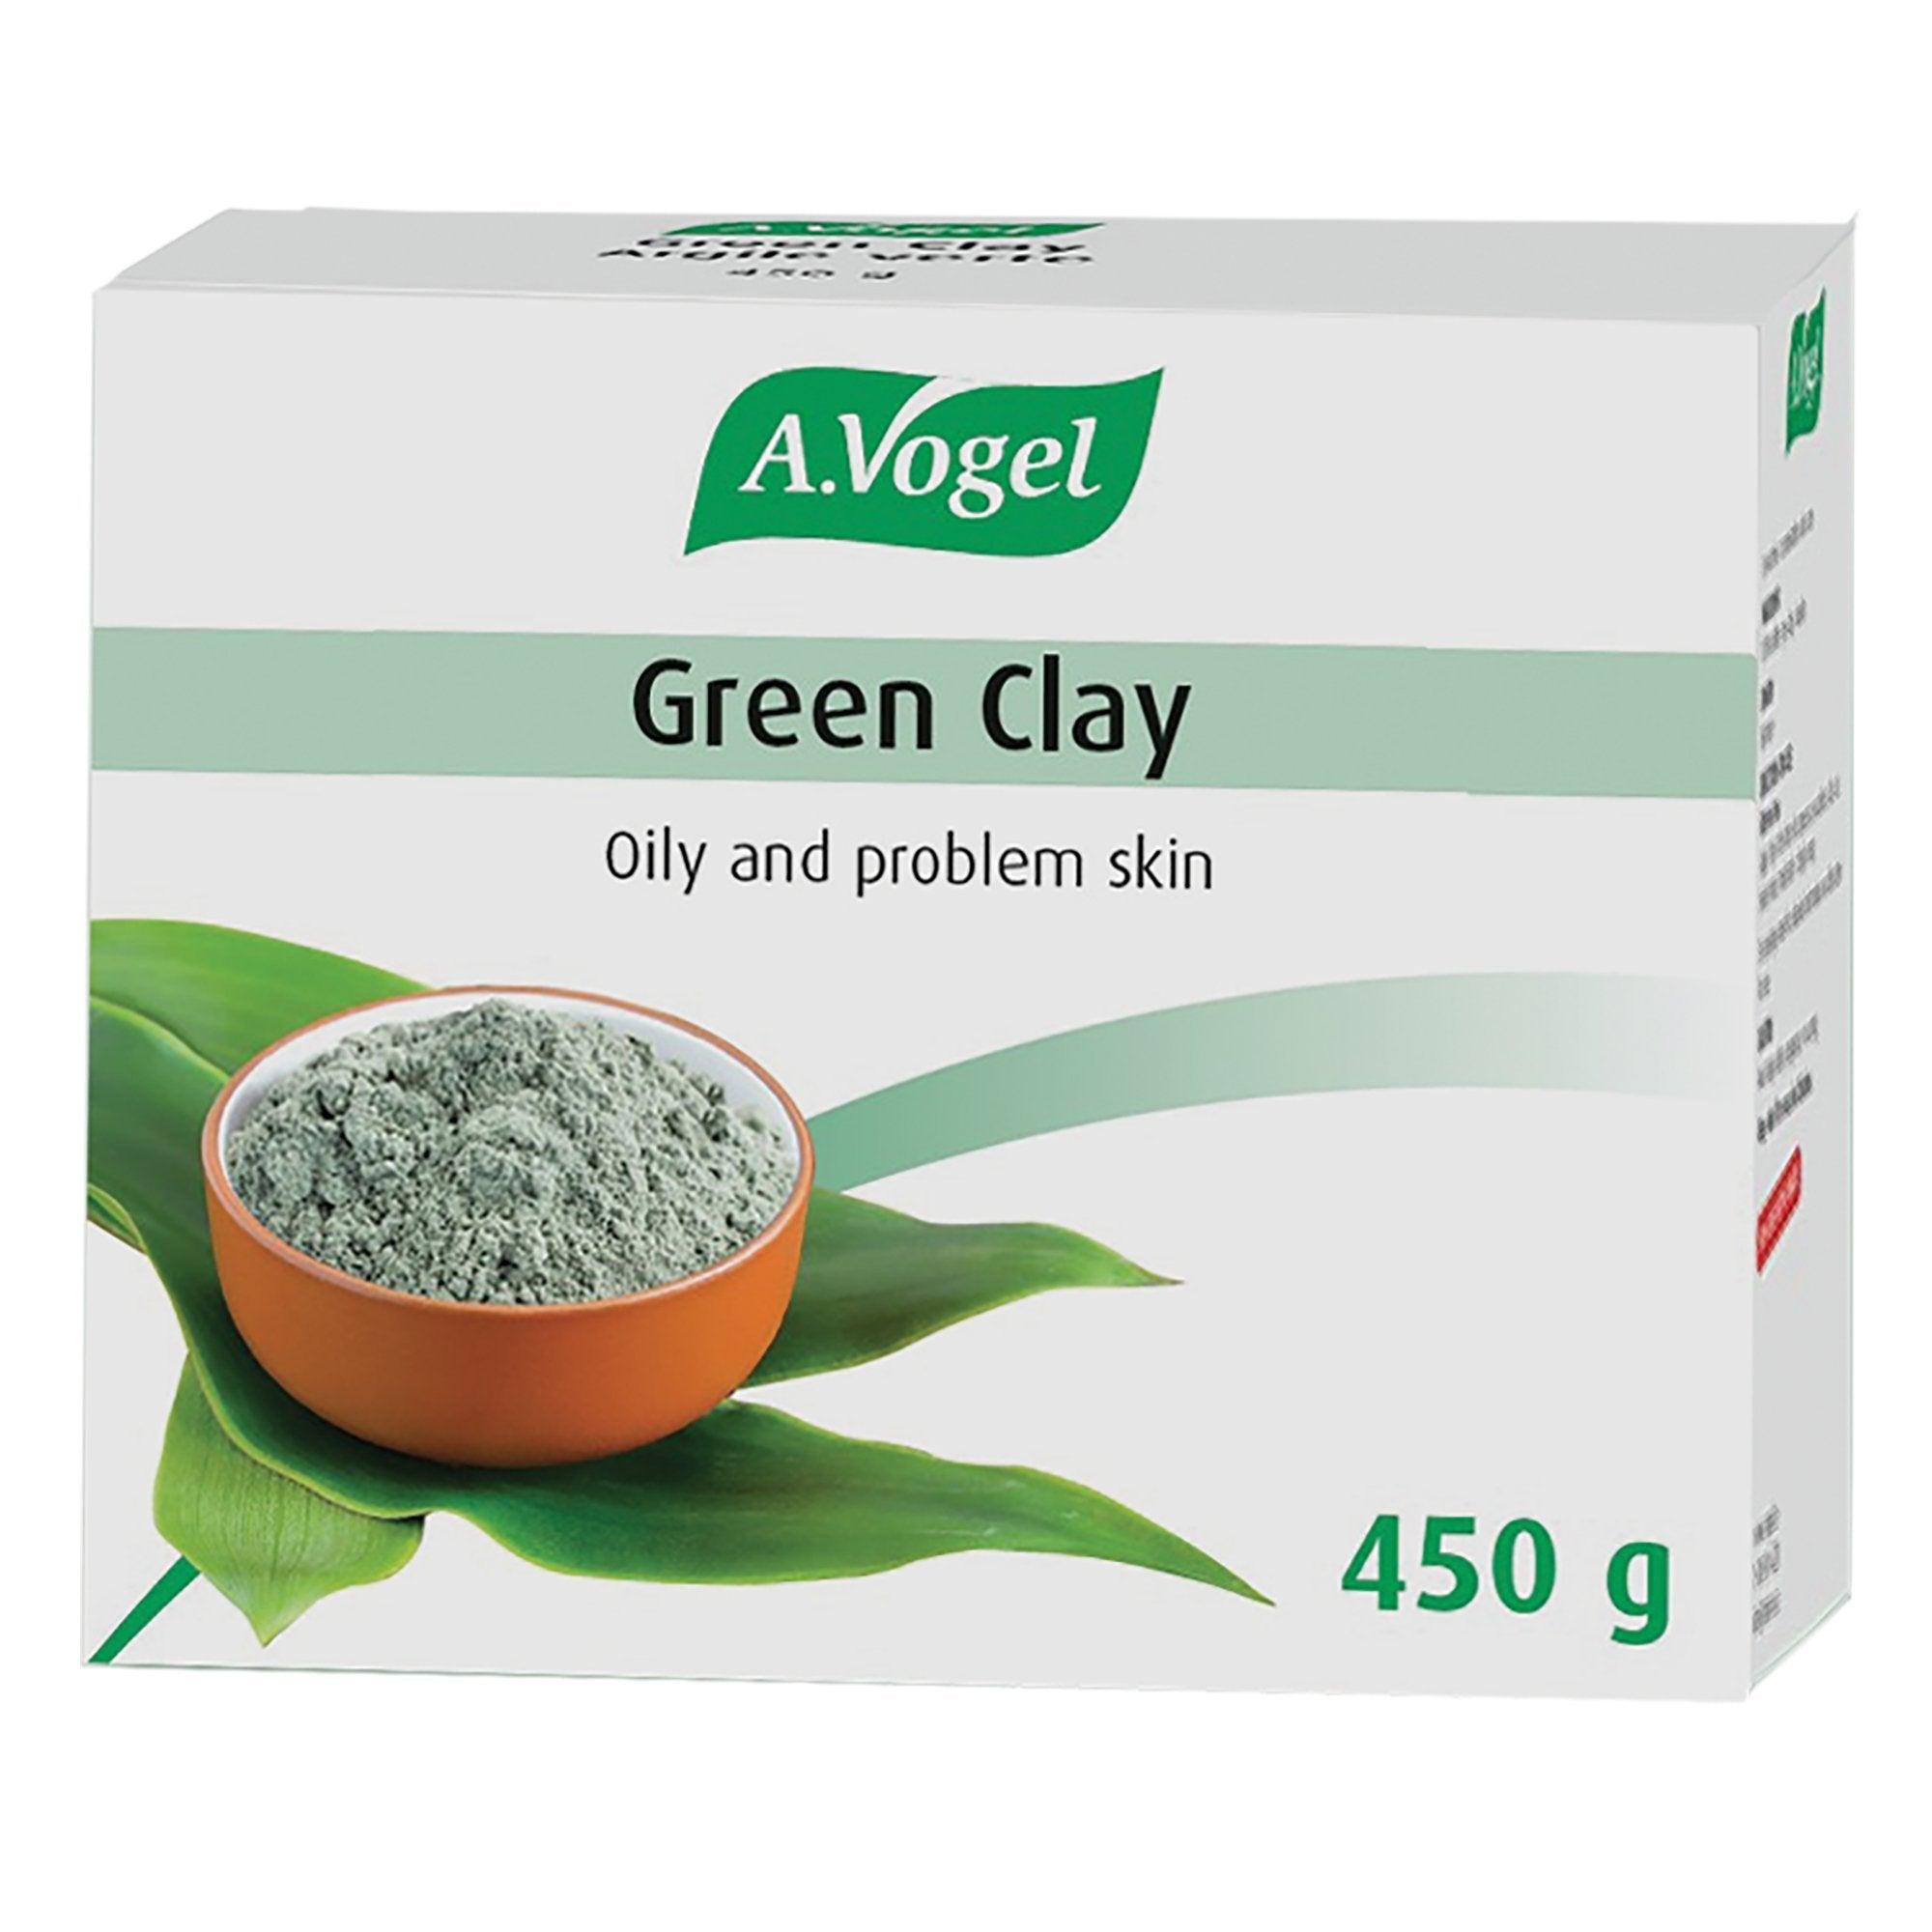 A. Vogel Green Clay 450g Face Mask at Village Vitamin Store